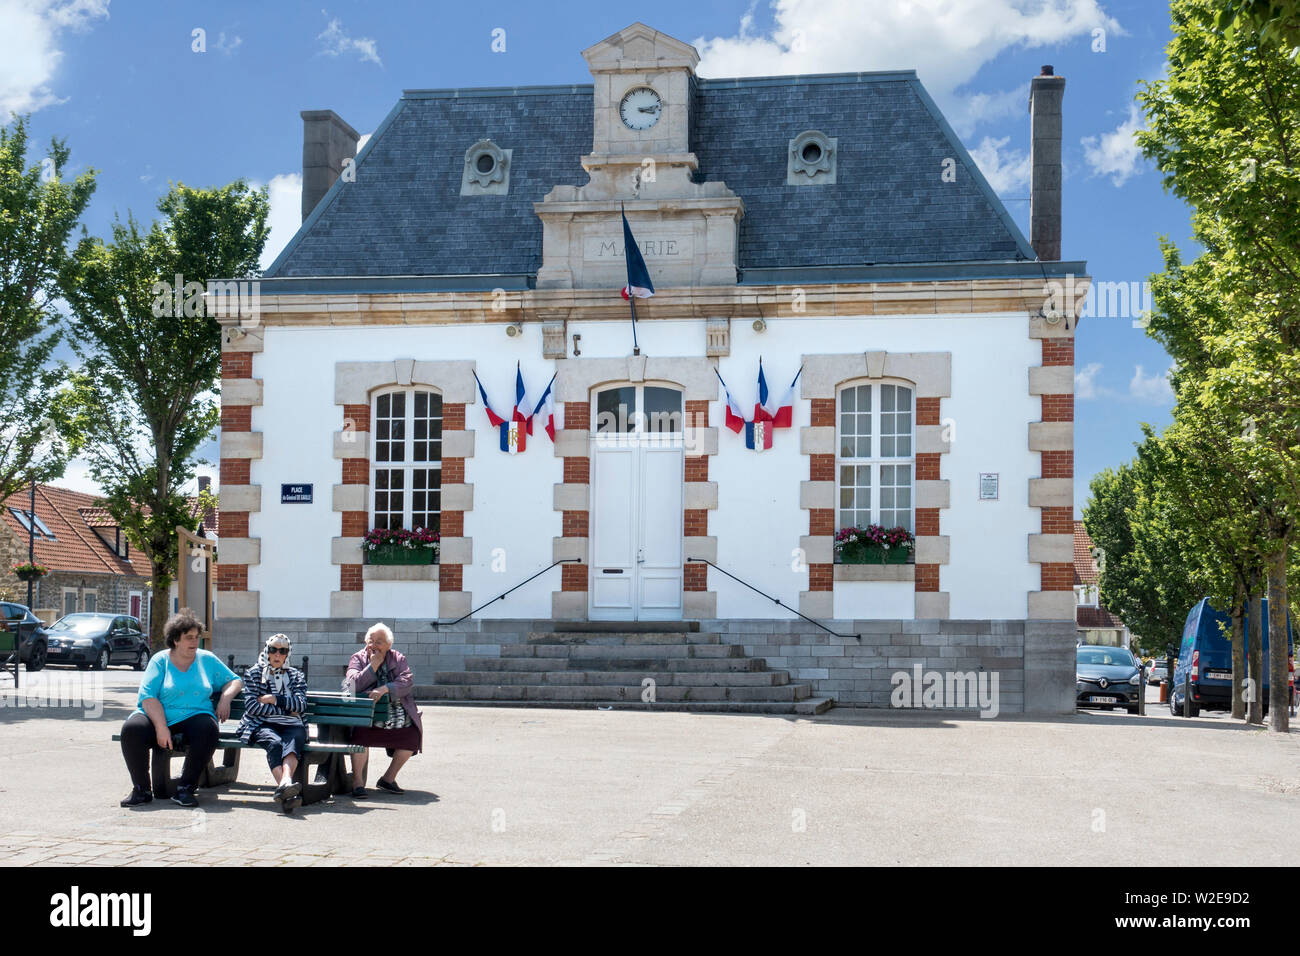 Old villagers sitting in front of the town hall at seaside resort Wissant along the Côte d'Opale, Pas-de-Calais, Hauts-de-France, France Stock Photo